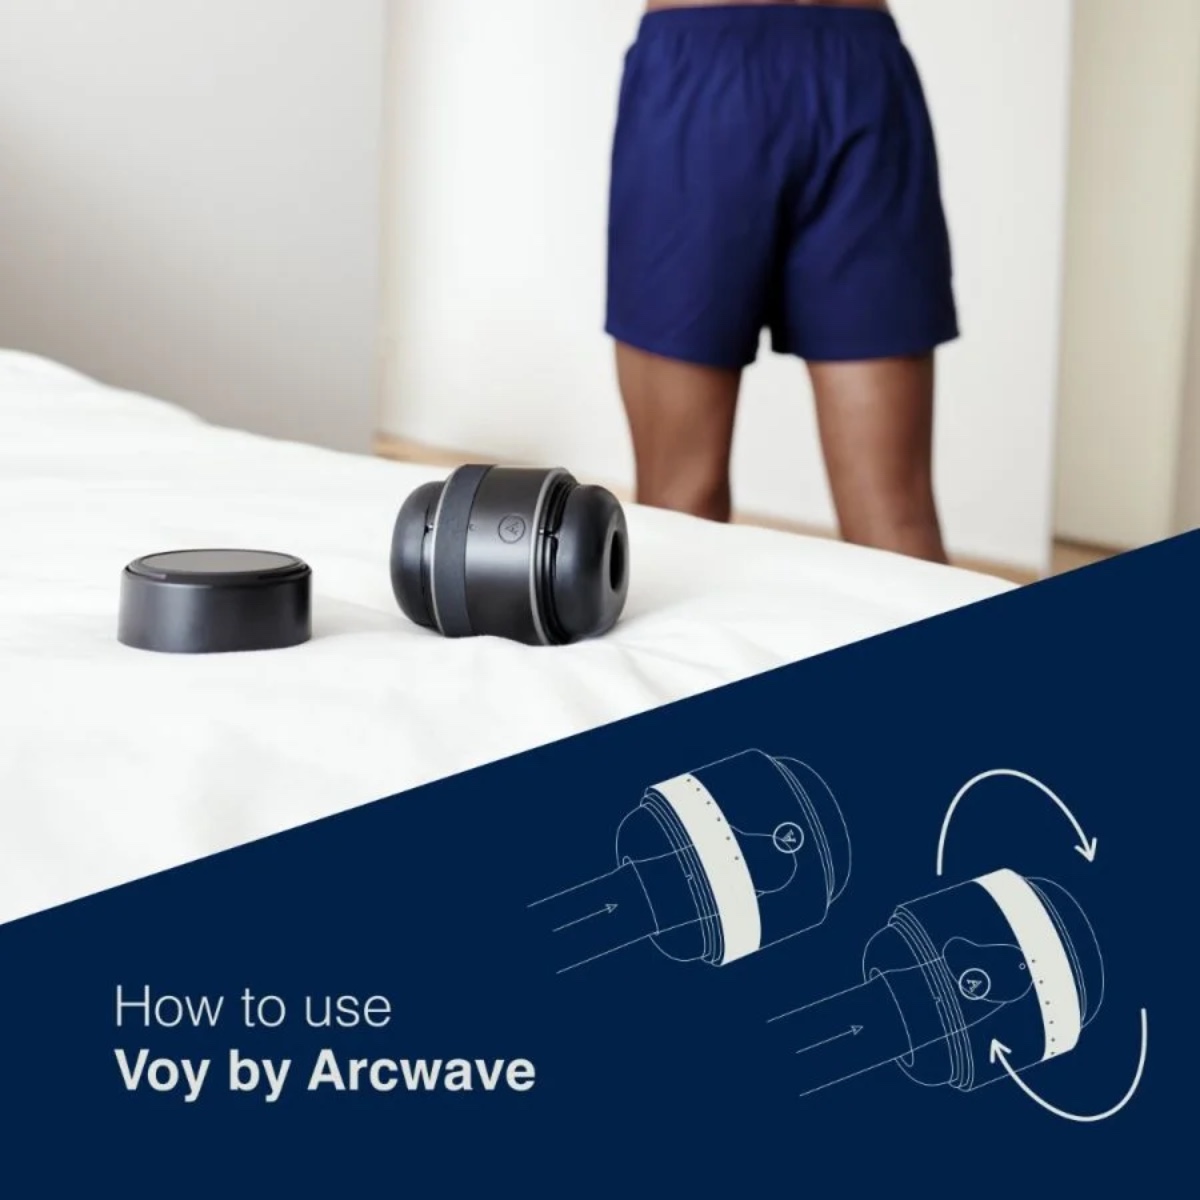 Arcwave Voy Stroker Review - The Best Ever Compact Stroker?